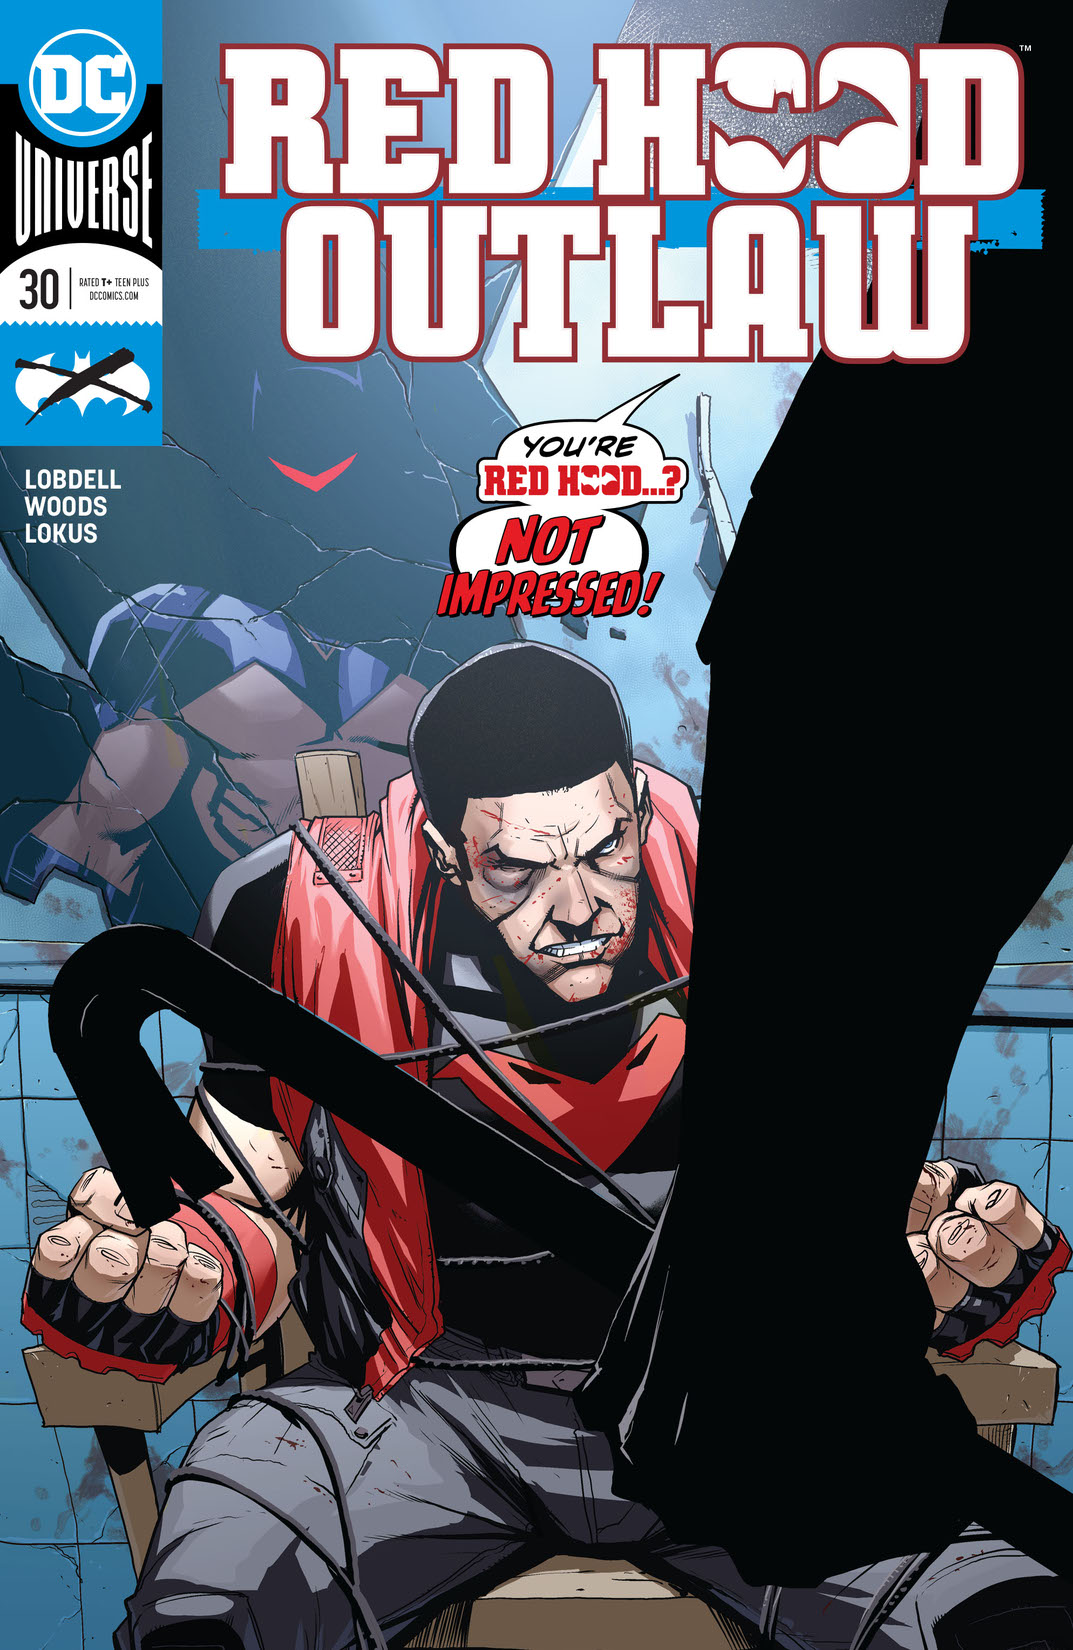 Red Hood: Outlaw (2016-) #30 preview images